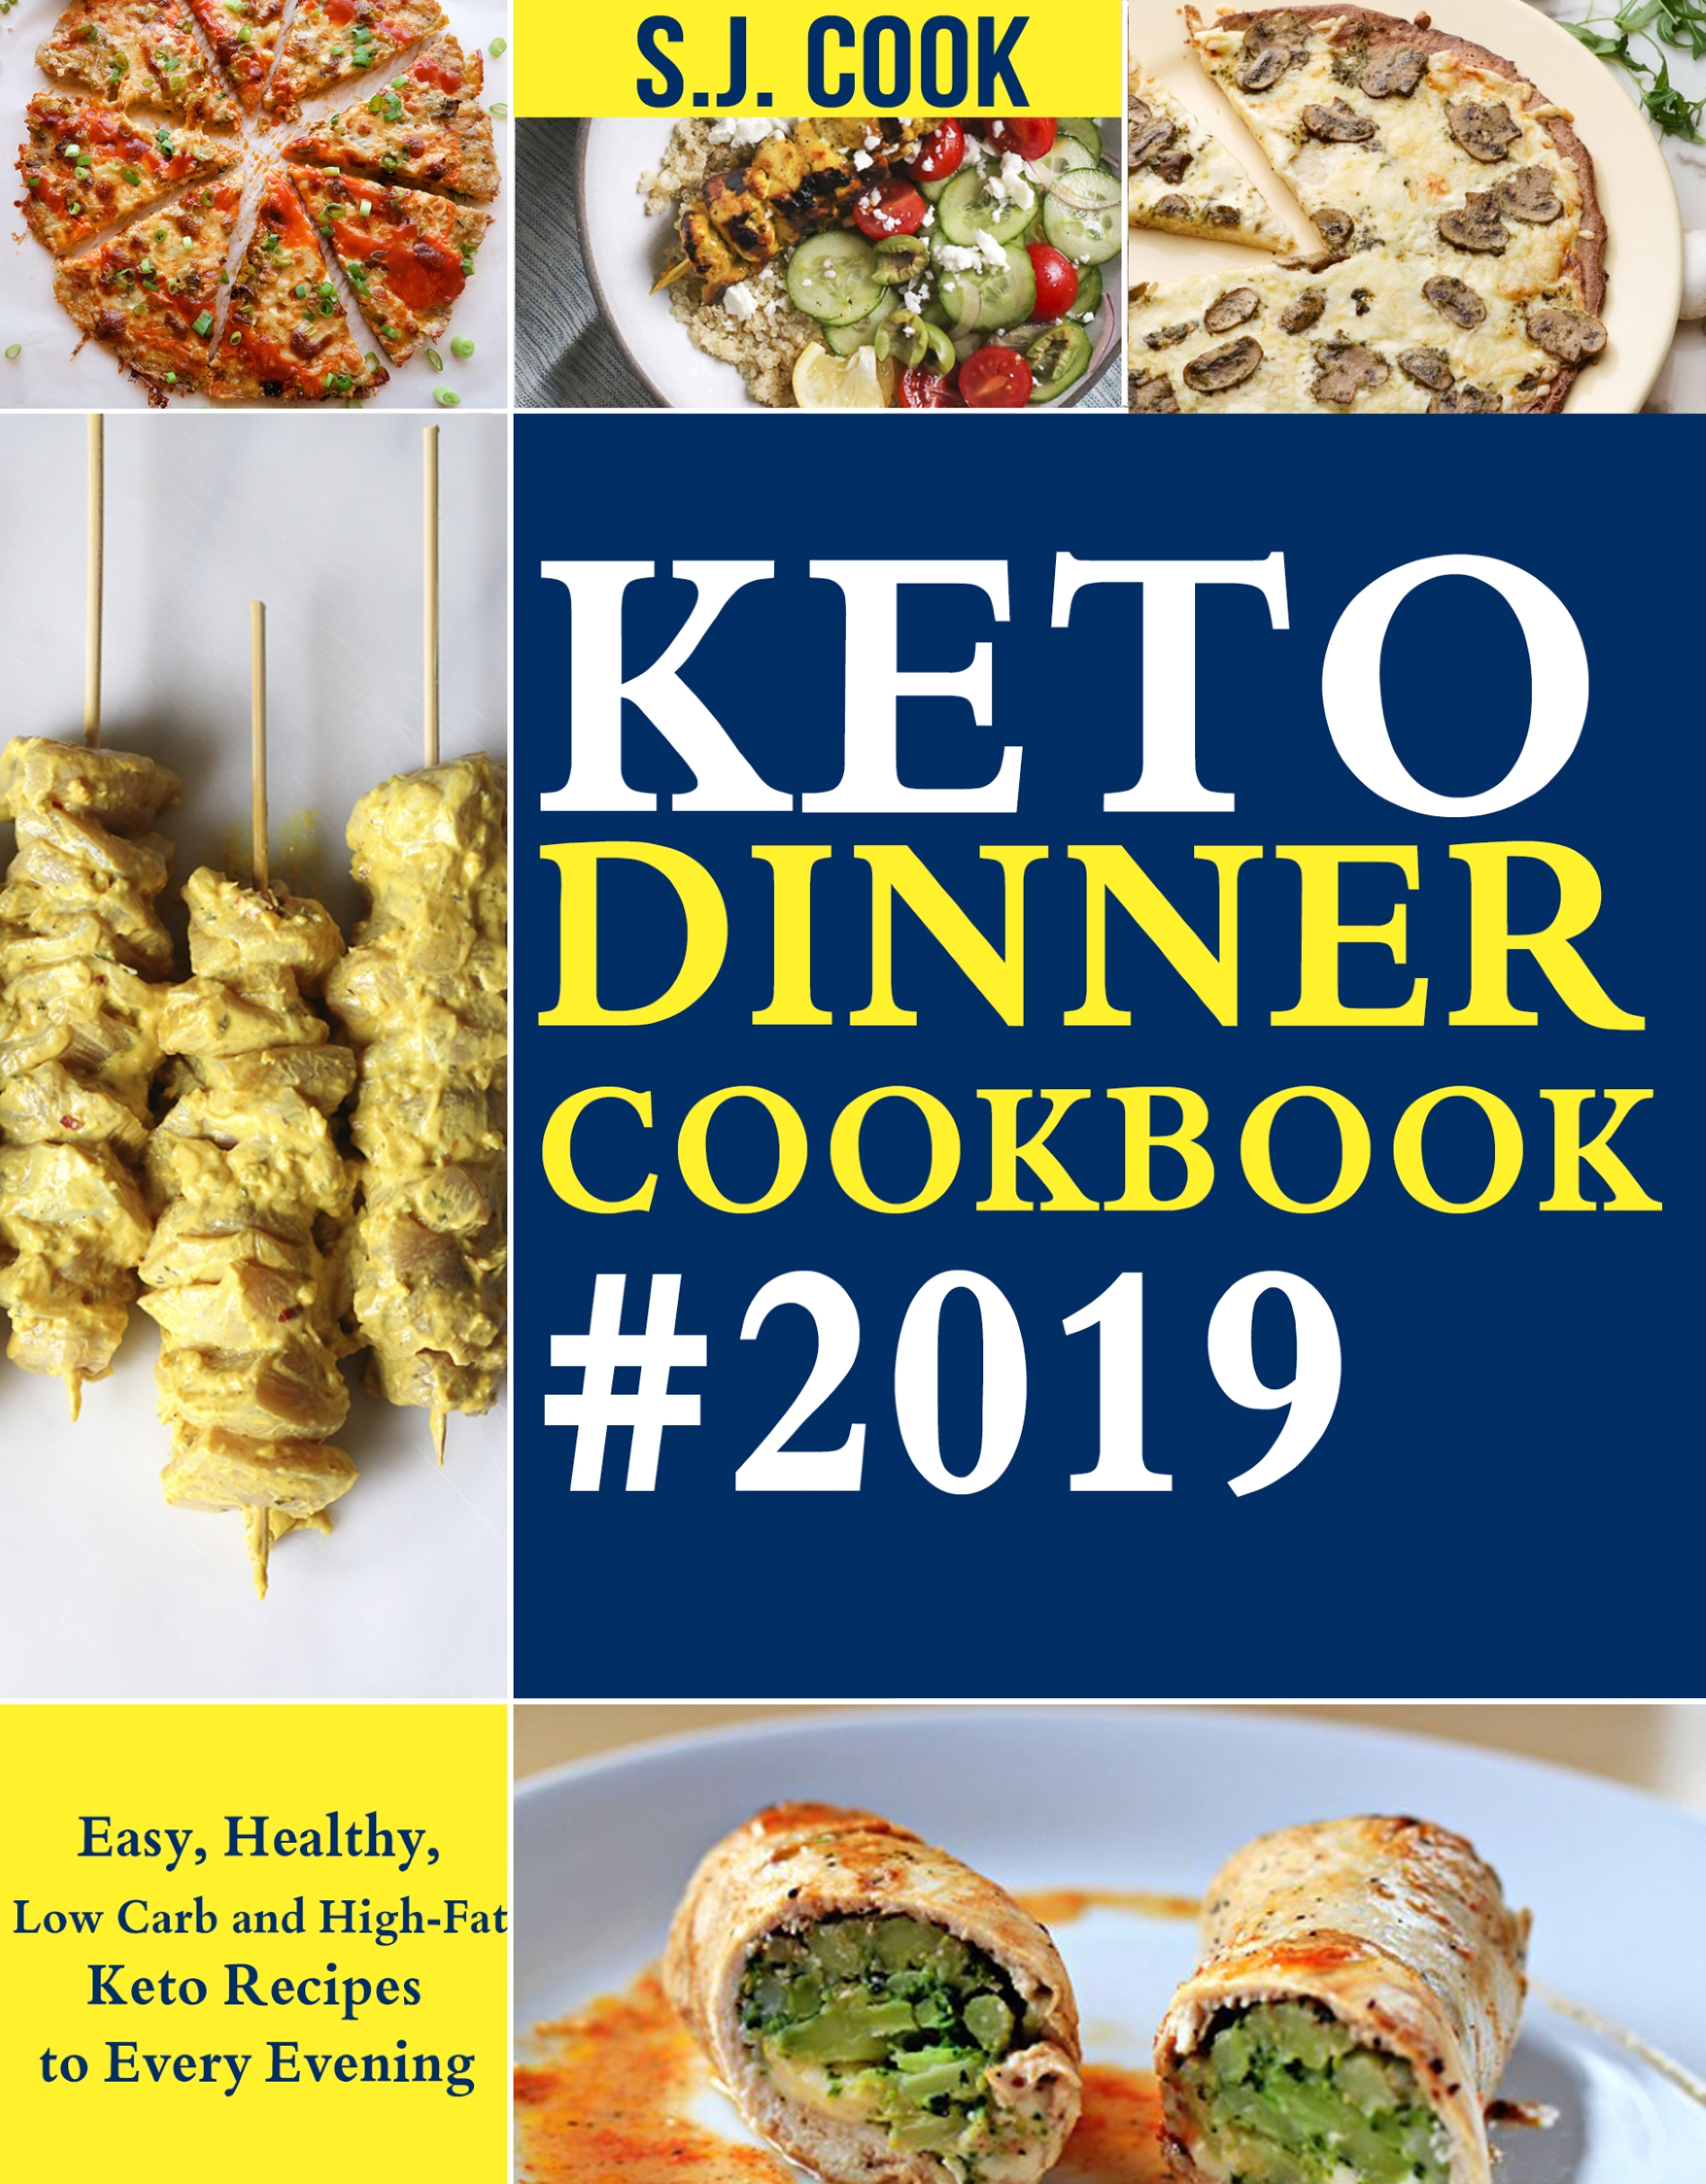 FREE: Keto Dinner Cookbook: Easy, Healthy, Low Carb and High-Fat Keto Recipes to Every Evening by S.J. Cook